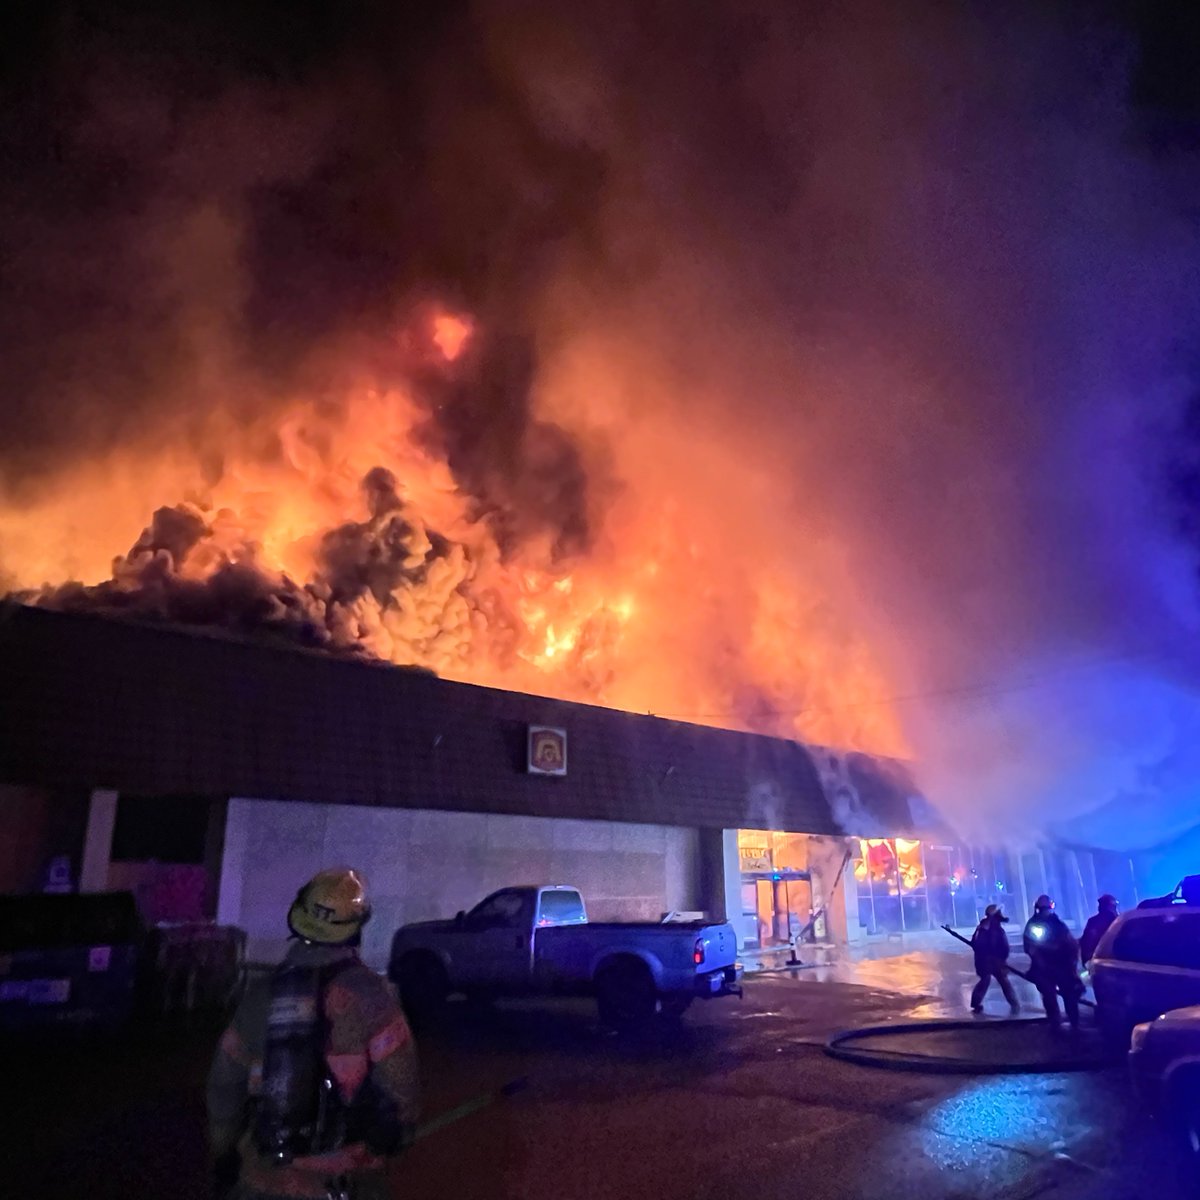 The Pacific Market Asian grocery in NE Portland burned in a 3-alarm fire overnight, with PF'R describing it as a  total loss.